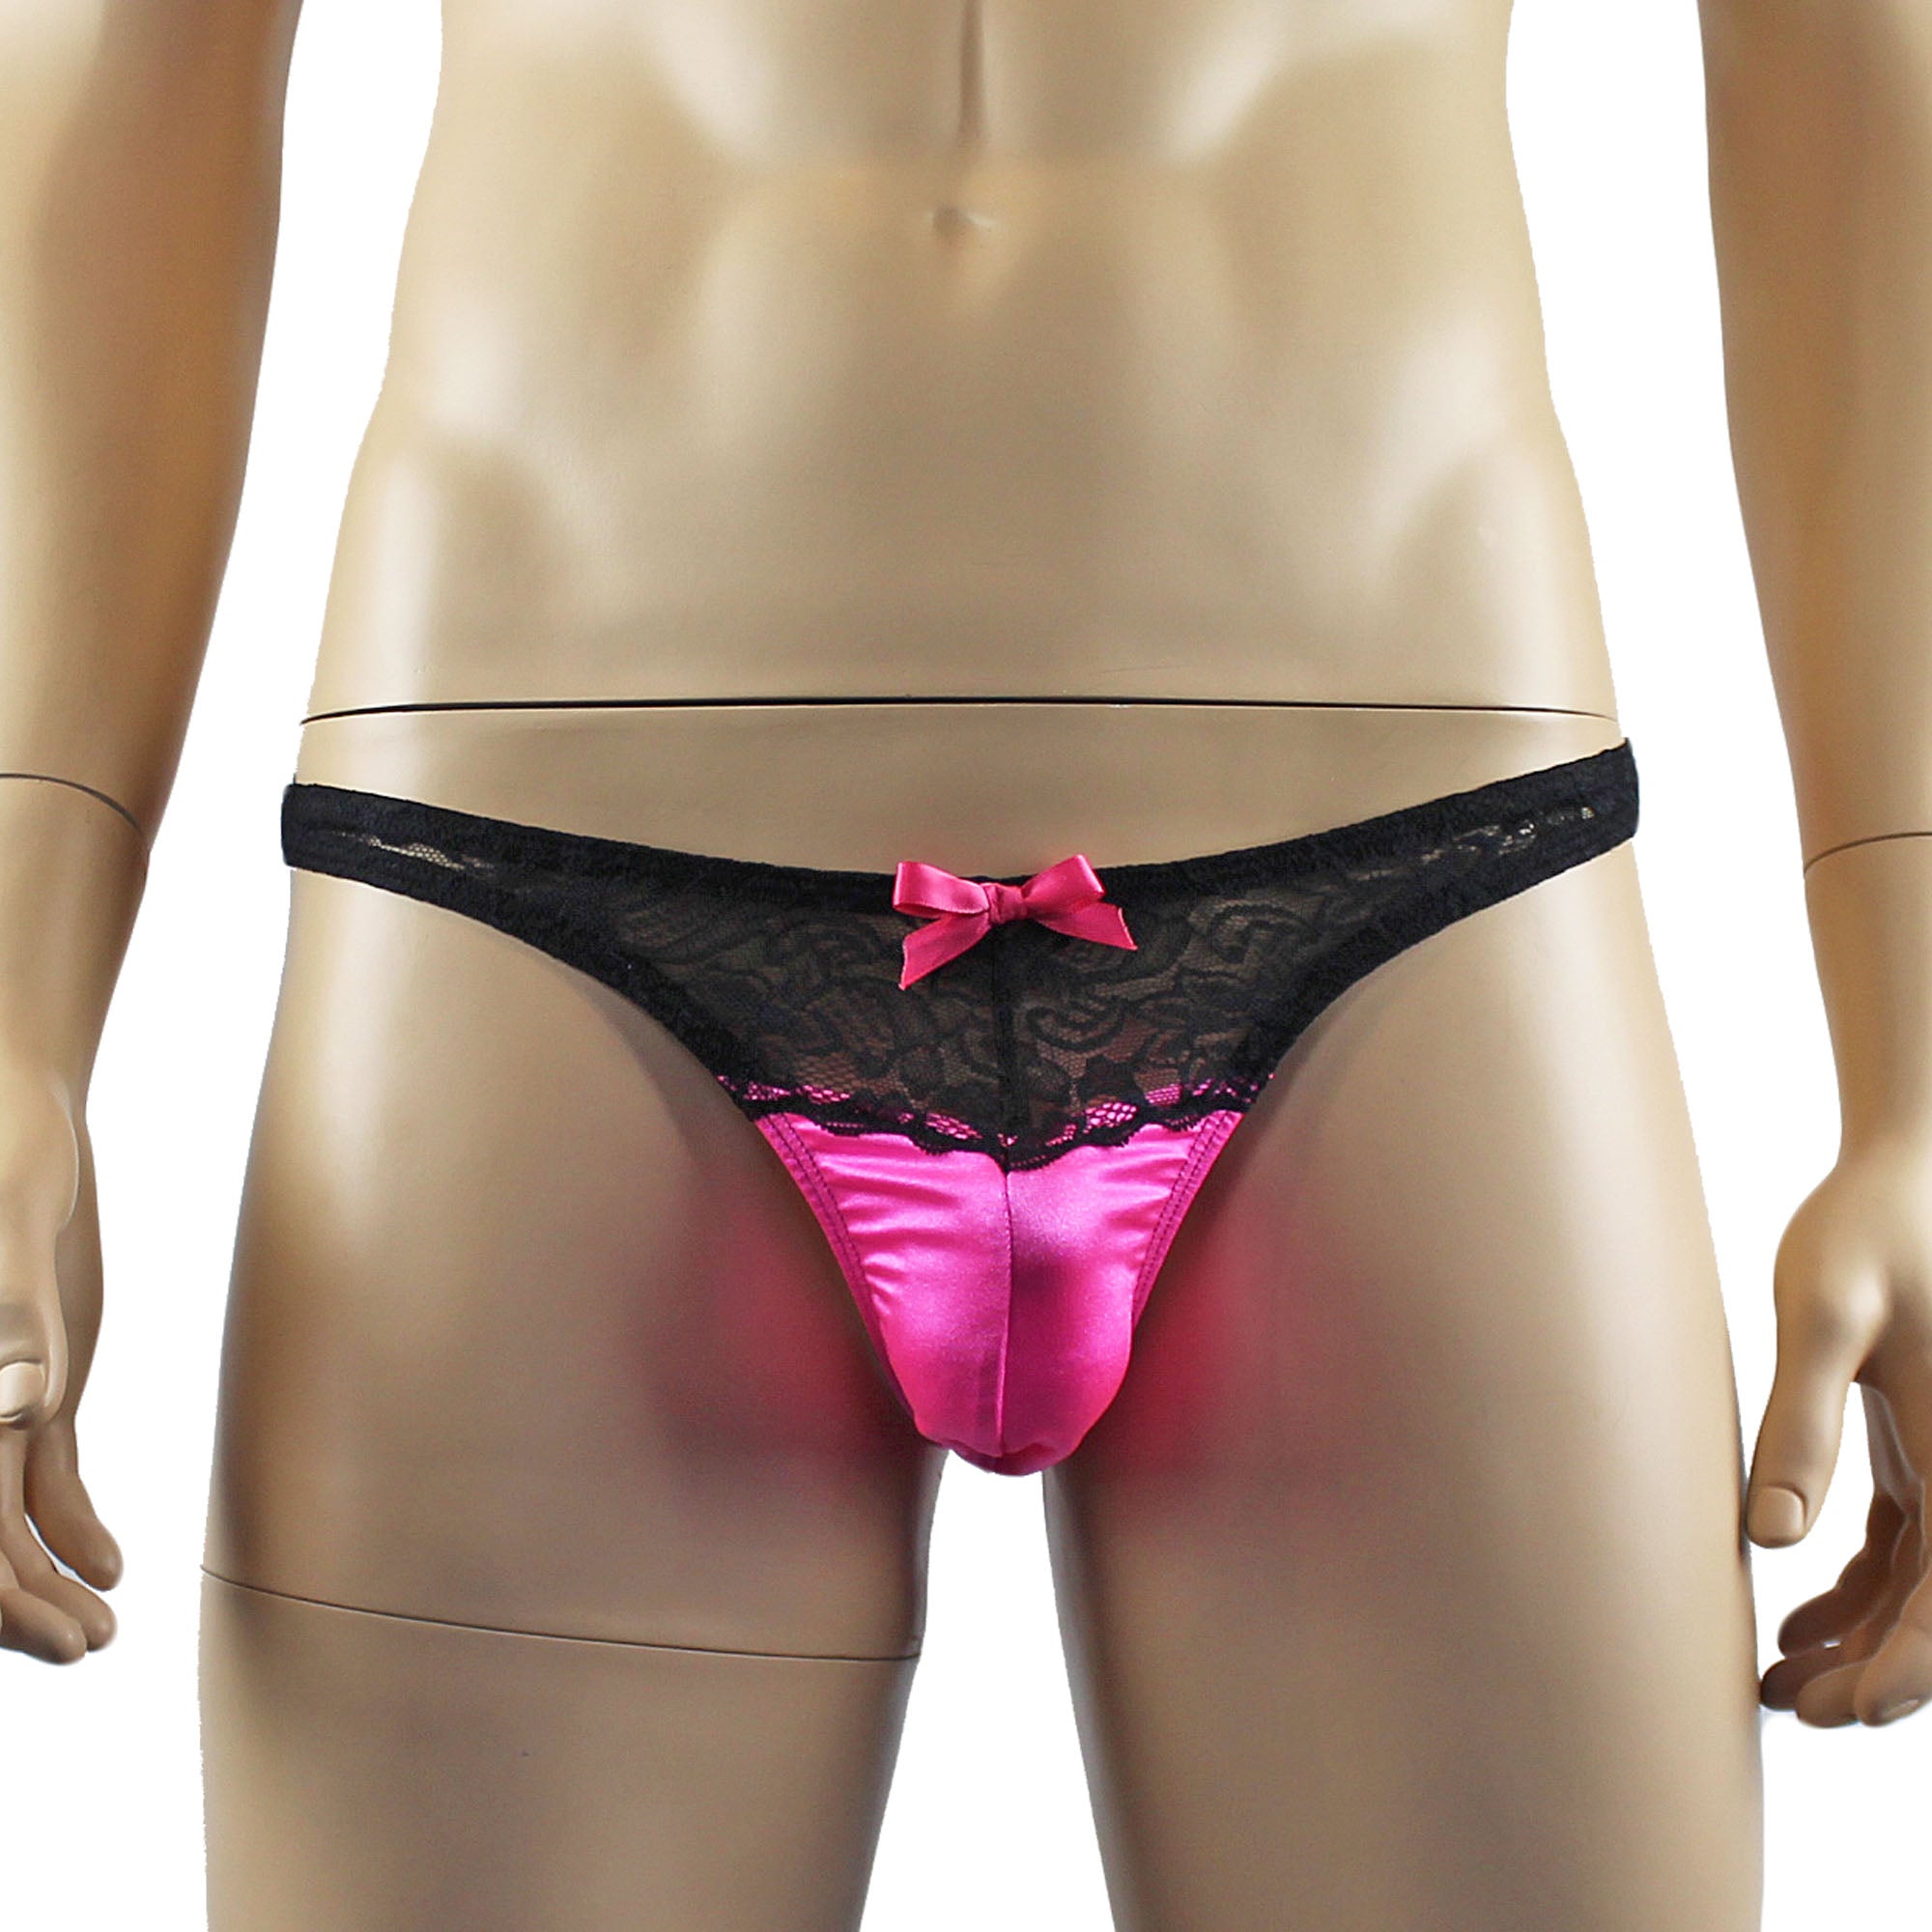 Mens Joanne Underwear Lacey Lovelies Thong Hot Pink and Black Lace